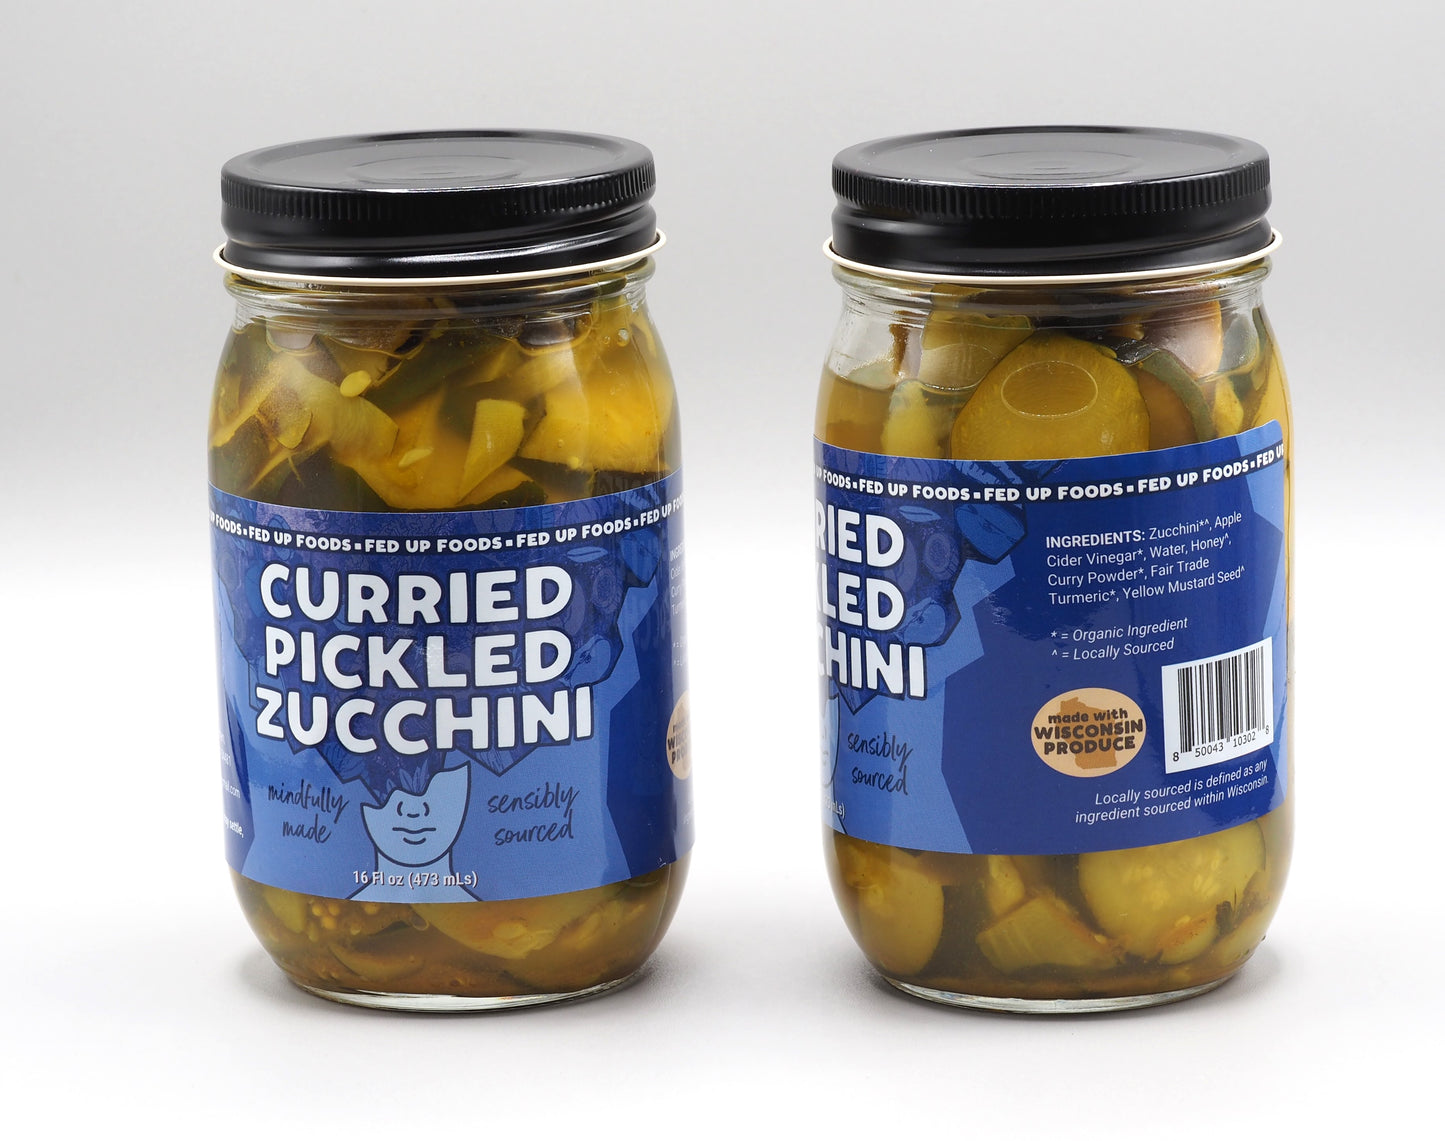 Fed Up Foods Curried Pickled Zucchini 2 pack